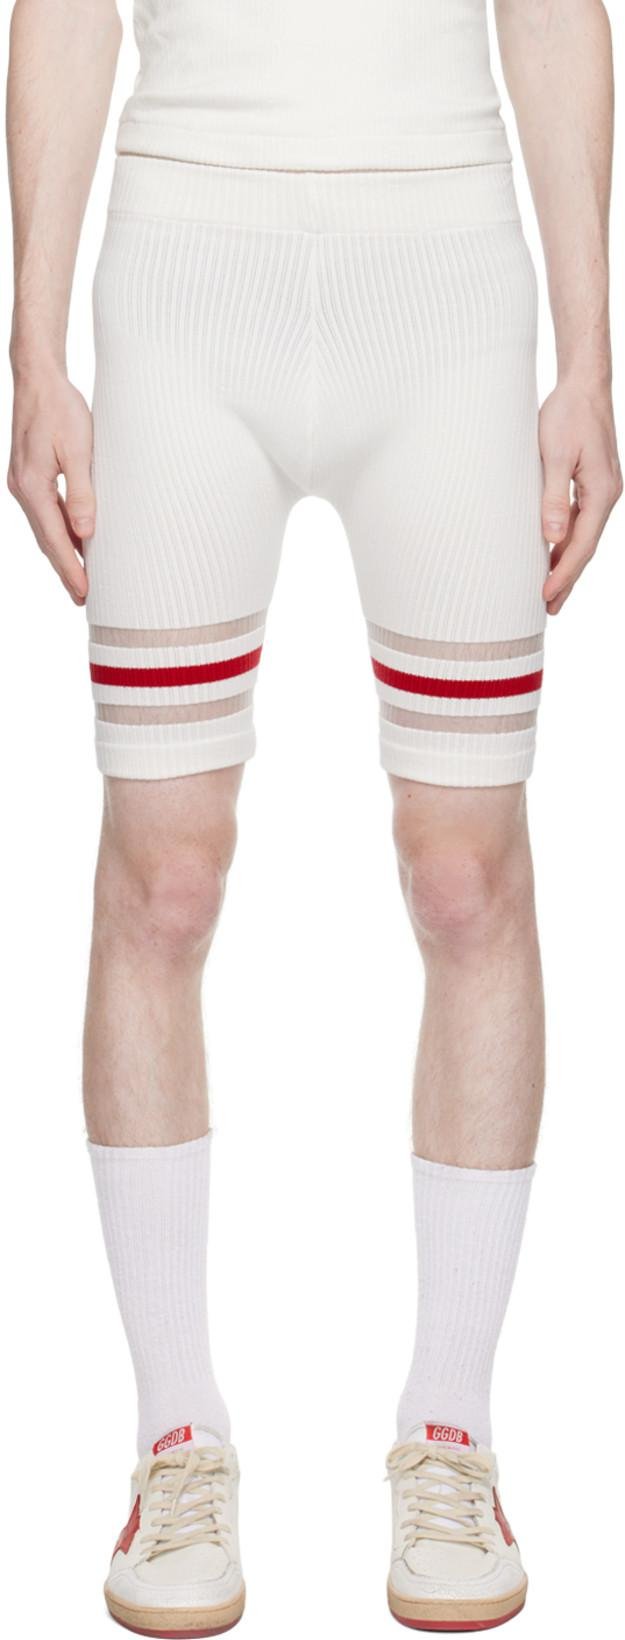 Off-White Cycling Shorts by ALLED-MARTINEZ